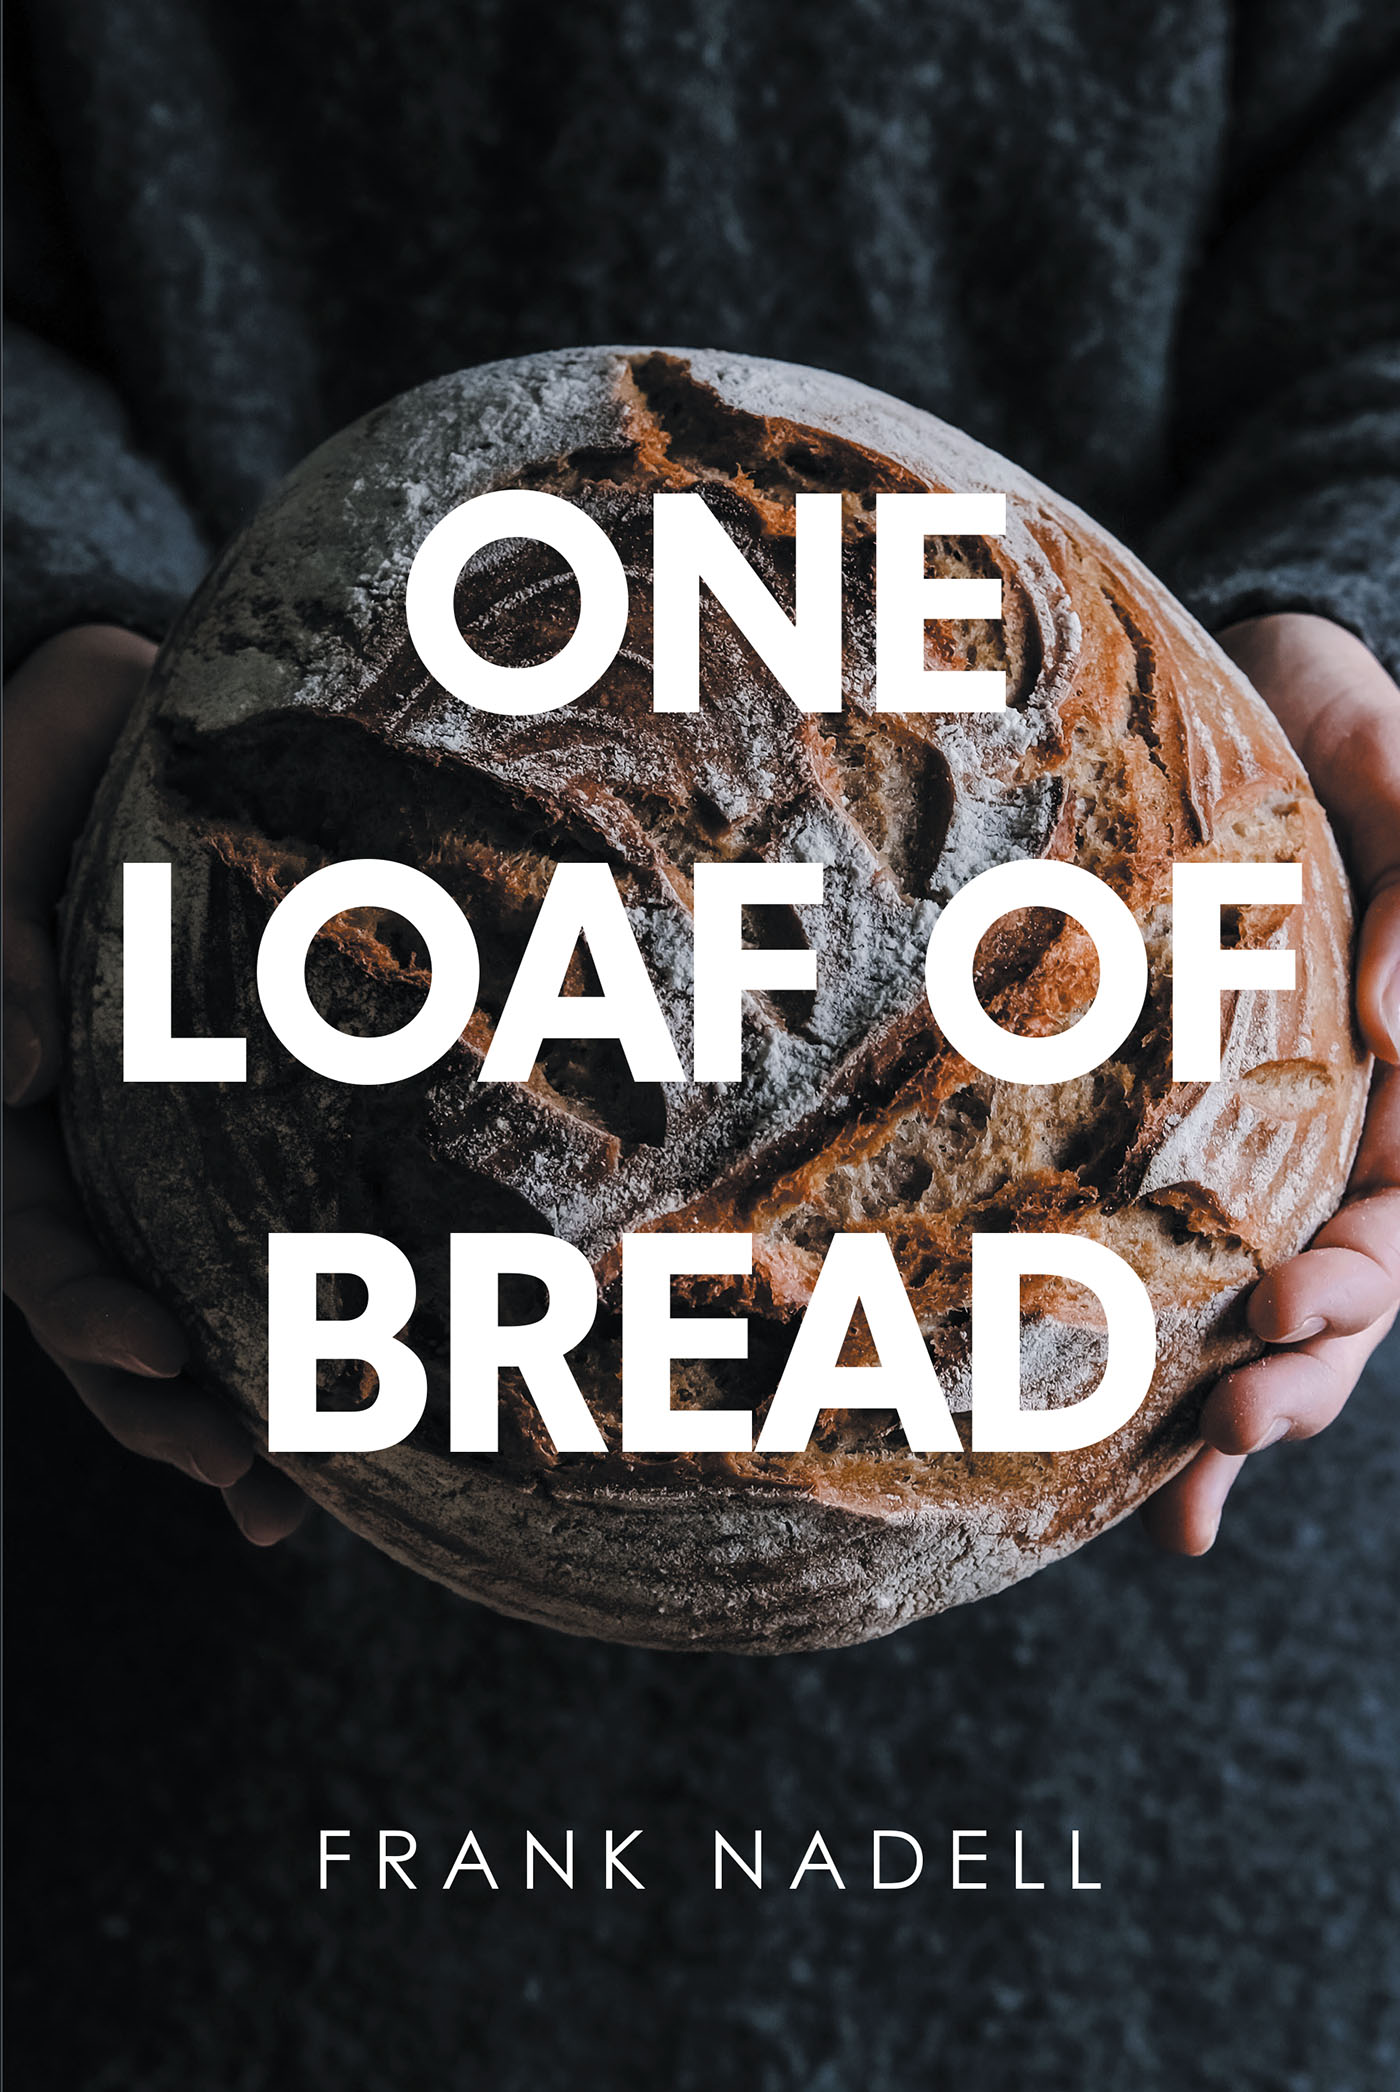 Author Frank Nadell’s New Book, "One Loaf of Bread," is the Fascinating Story of a Young German Immigrant's Life in America and His Path to Overcoming Life's Challenges